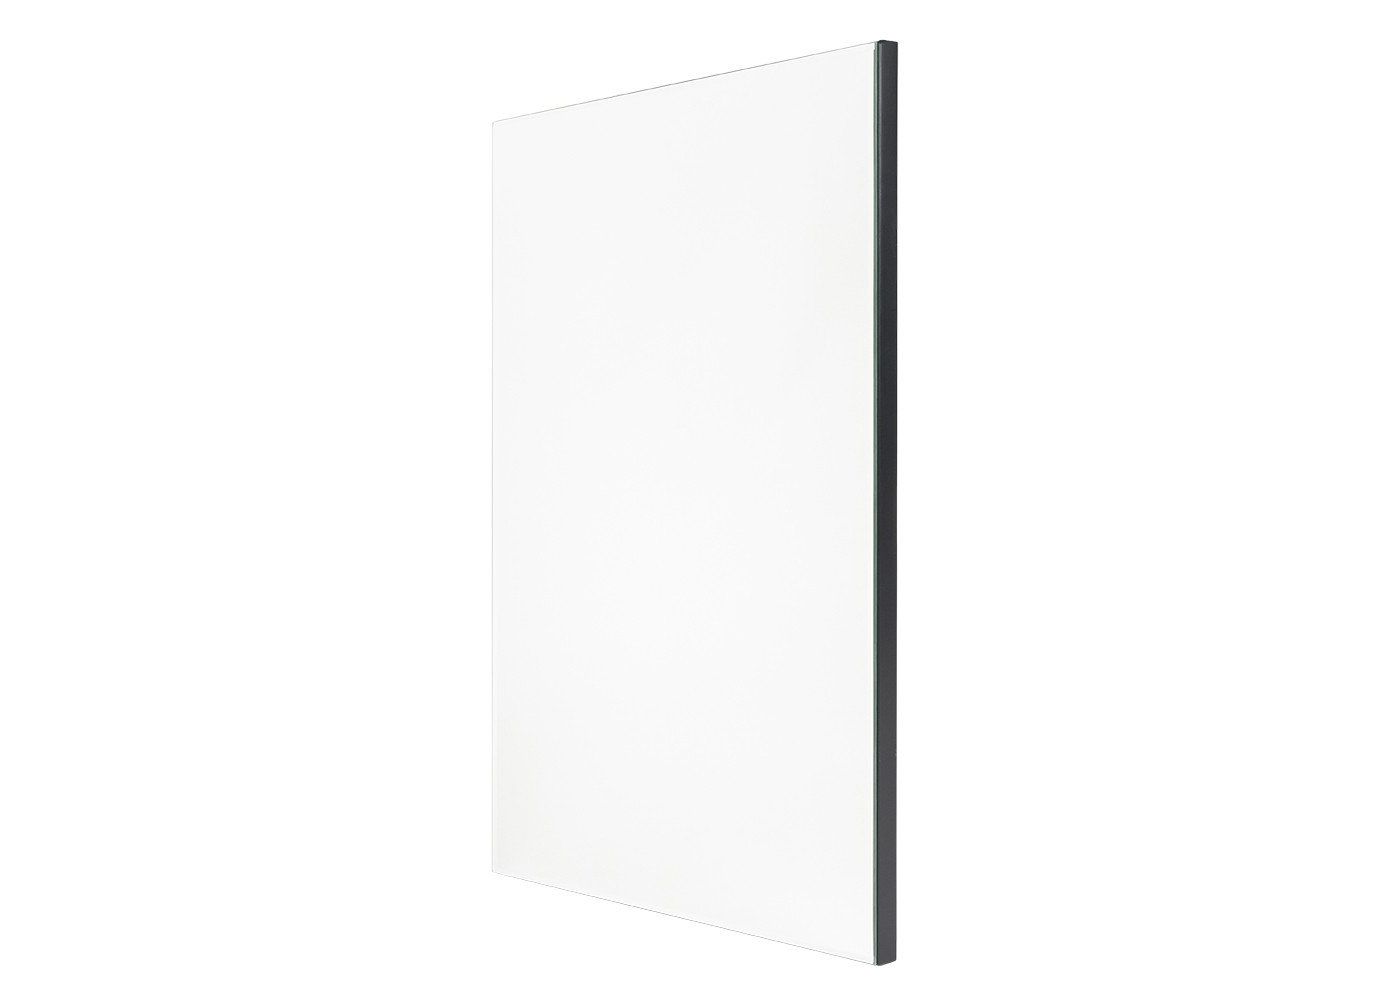 Preferred Bevelled Edge Wall Mirror Rectangular Pertaining To Large Glass Bevelled Wall Mirrors (View 18 of 20)